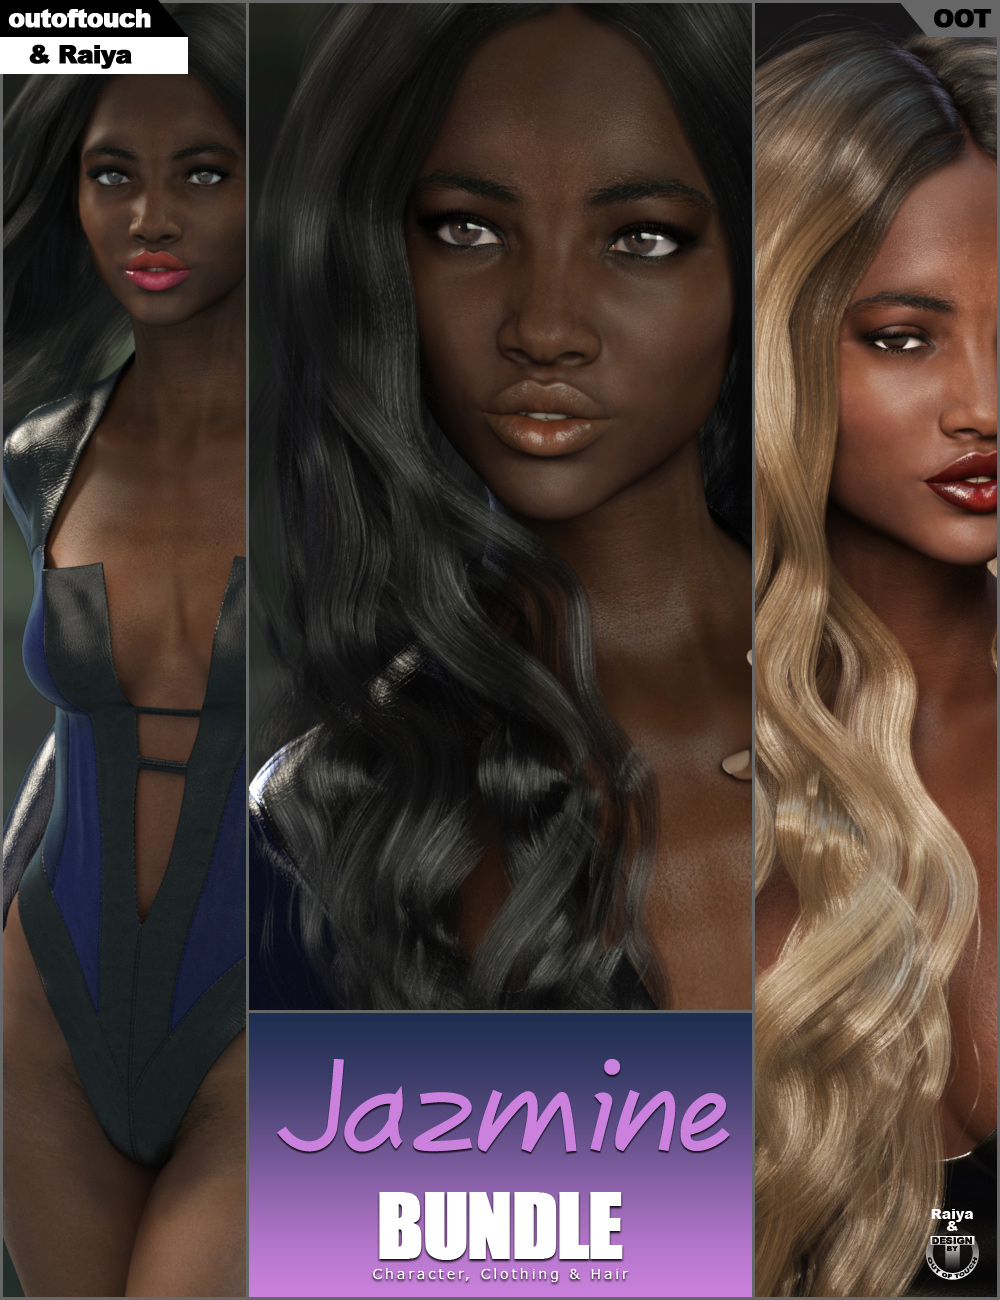 Jazmine Character, Hair & Clothing Bundle by: outoftouchRaiya, 3D Models by Daz 3D